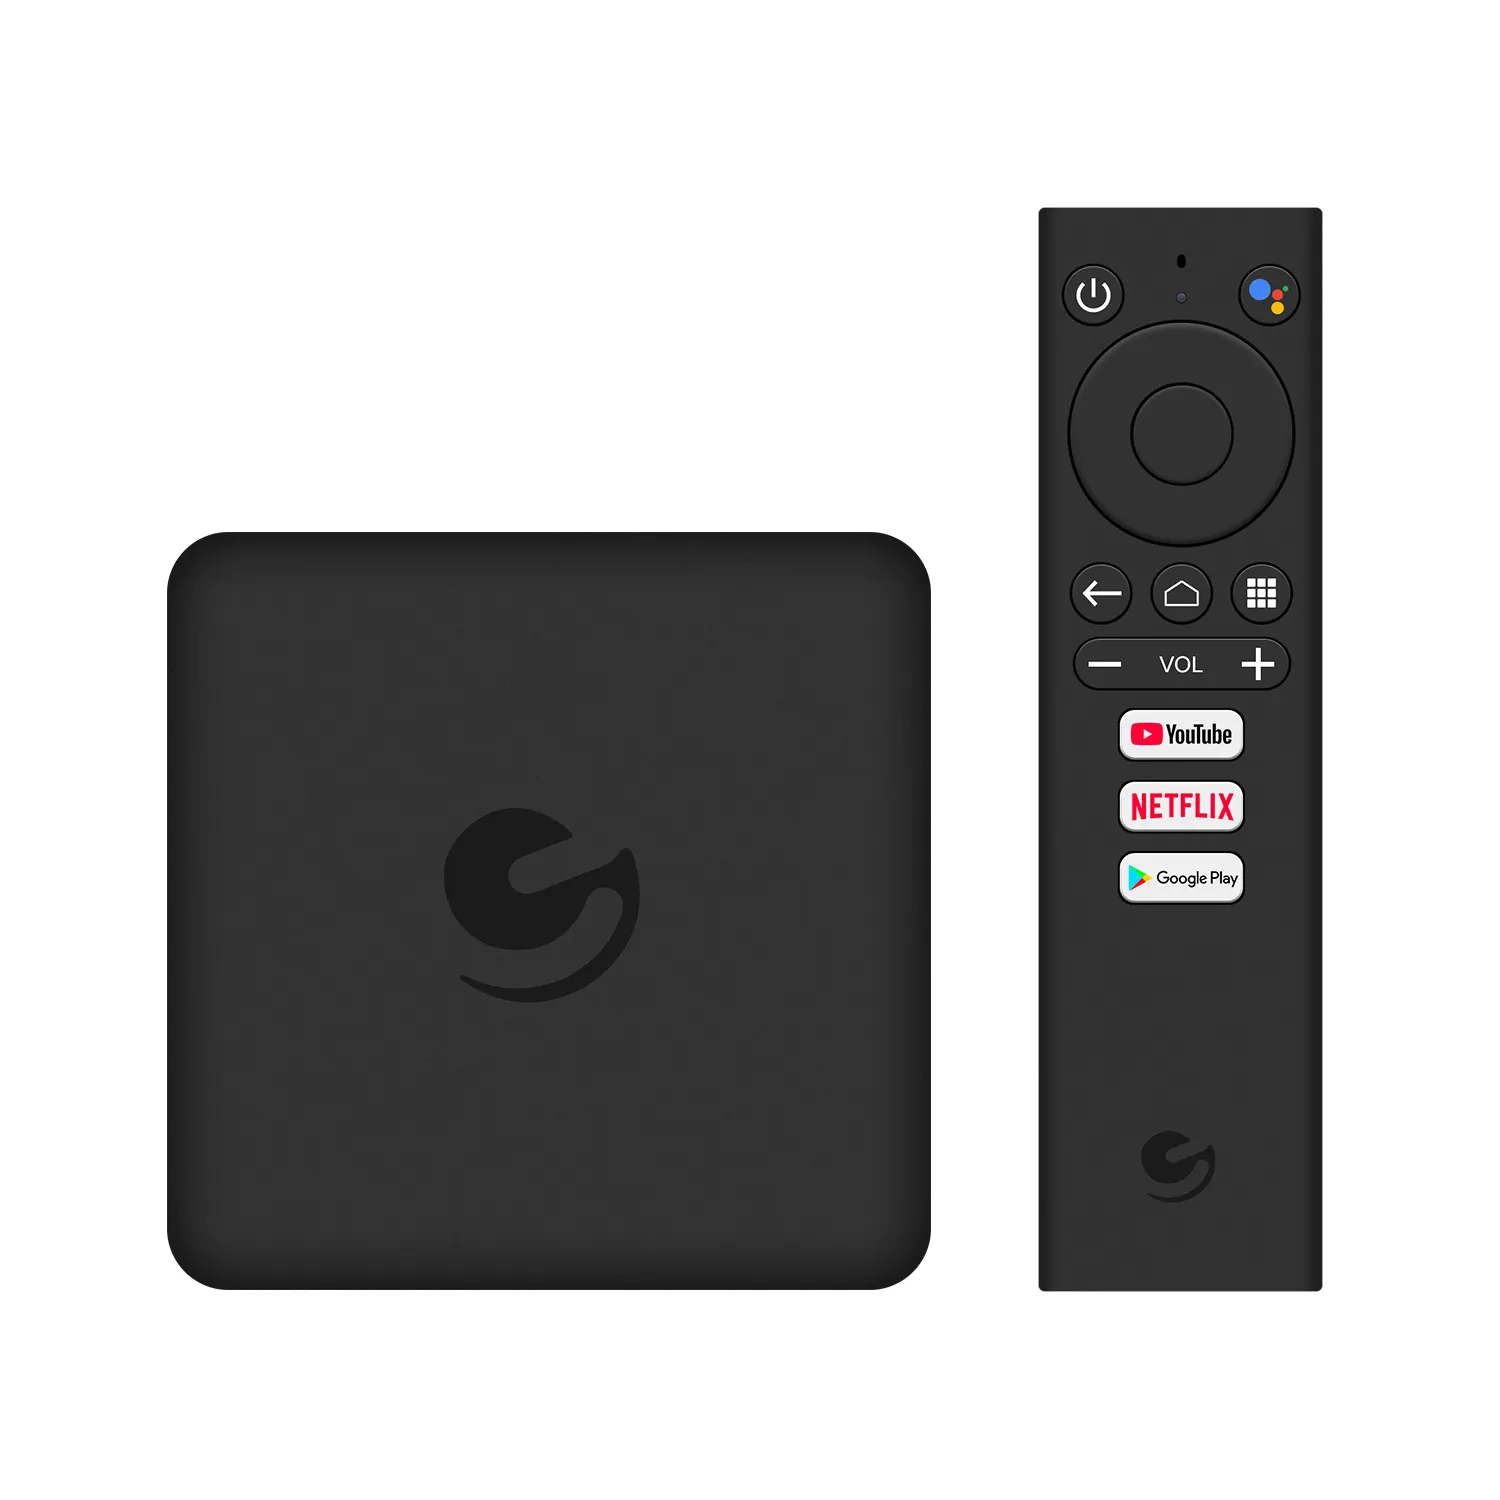 Ematic EN1015K Google certified 4K Netflix 2.4G/5G WiFi free download google play store smart Android TV box with voice control